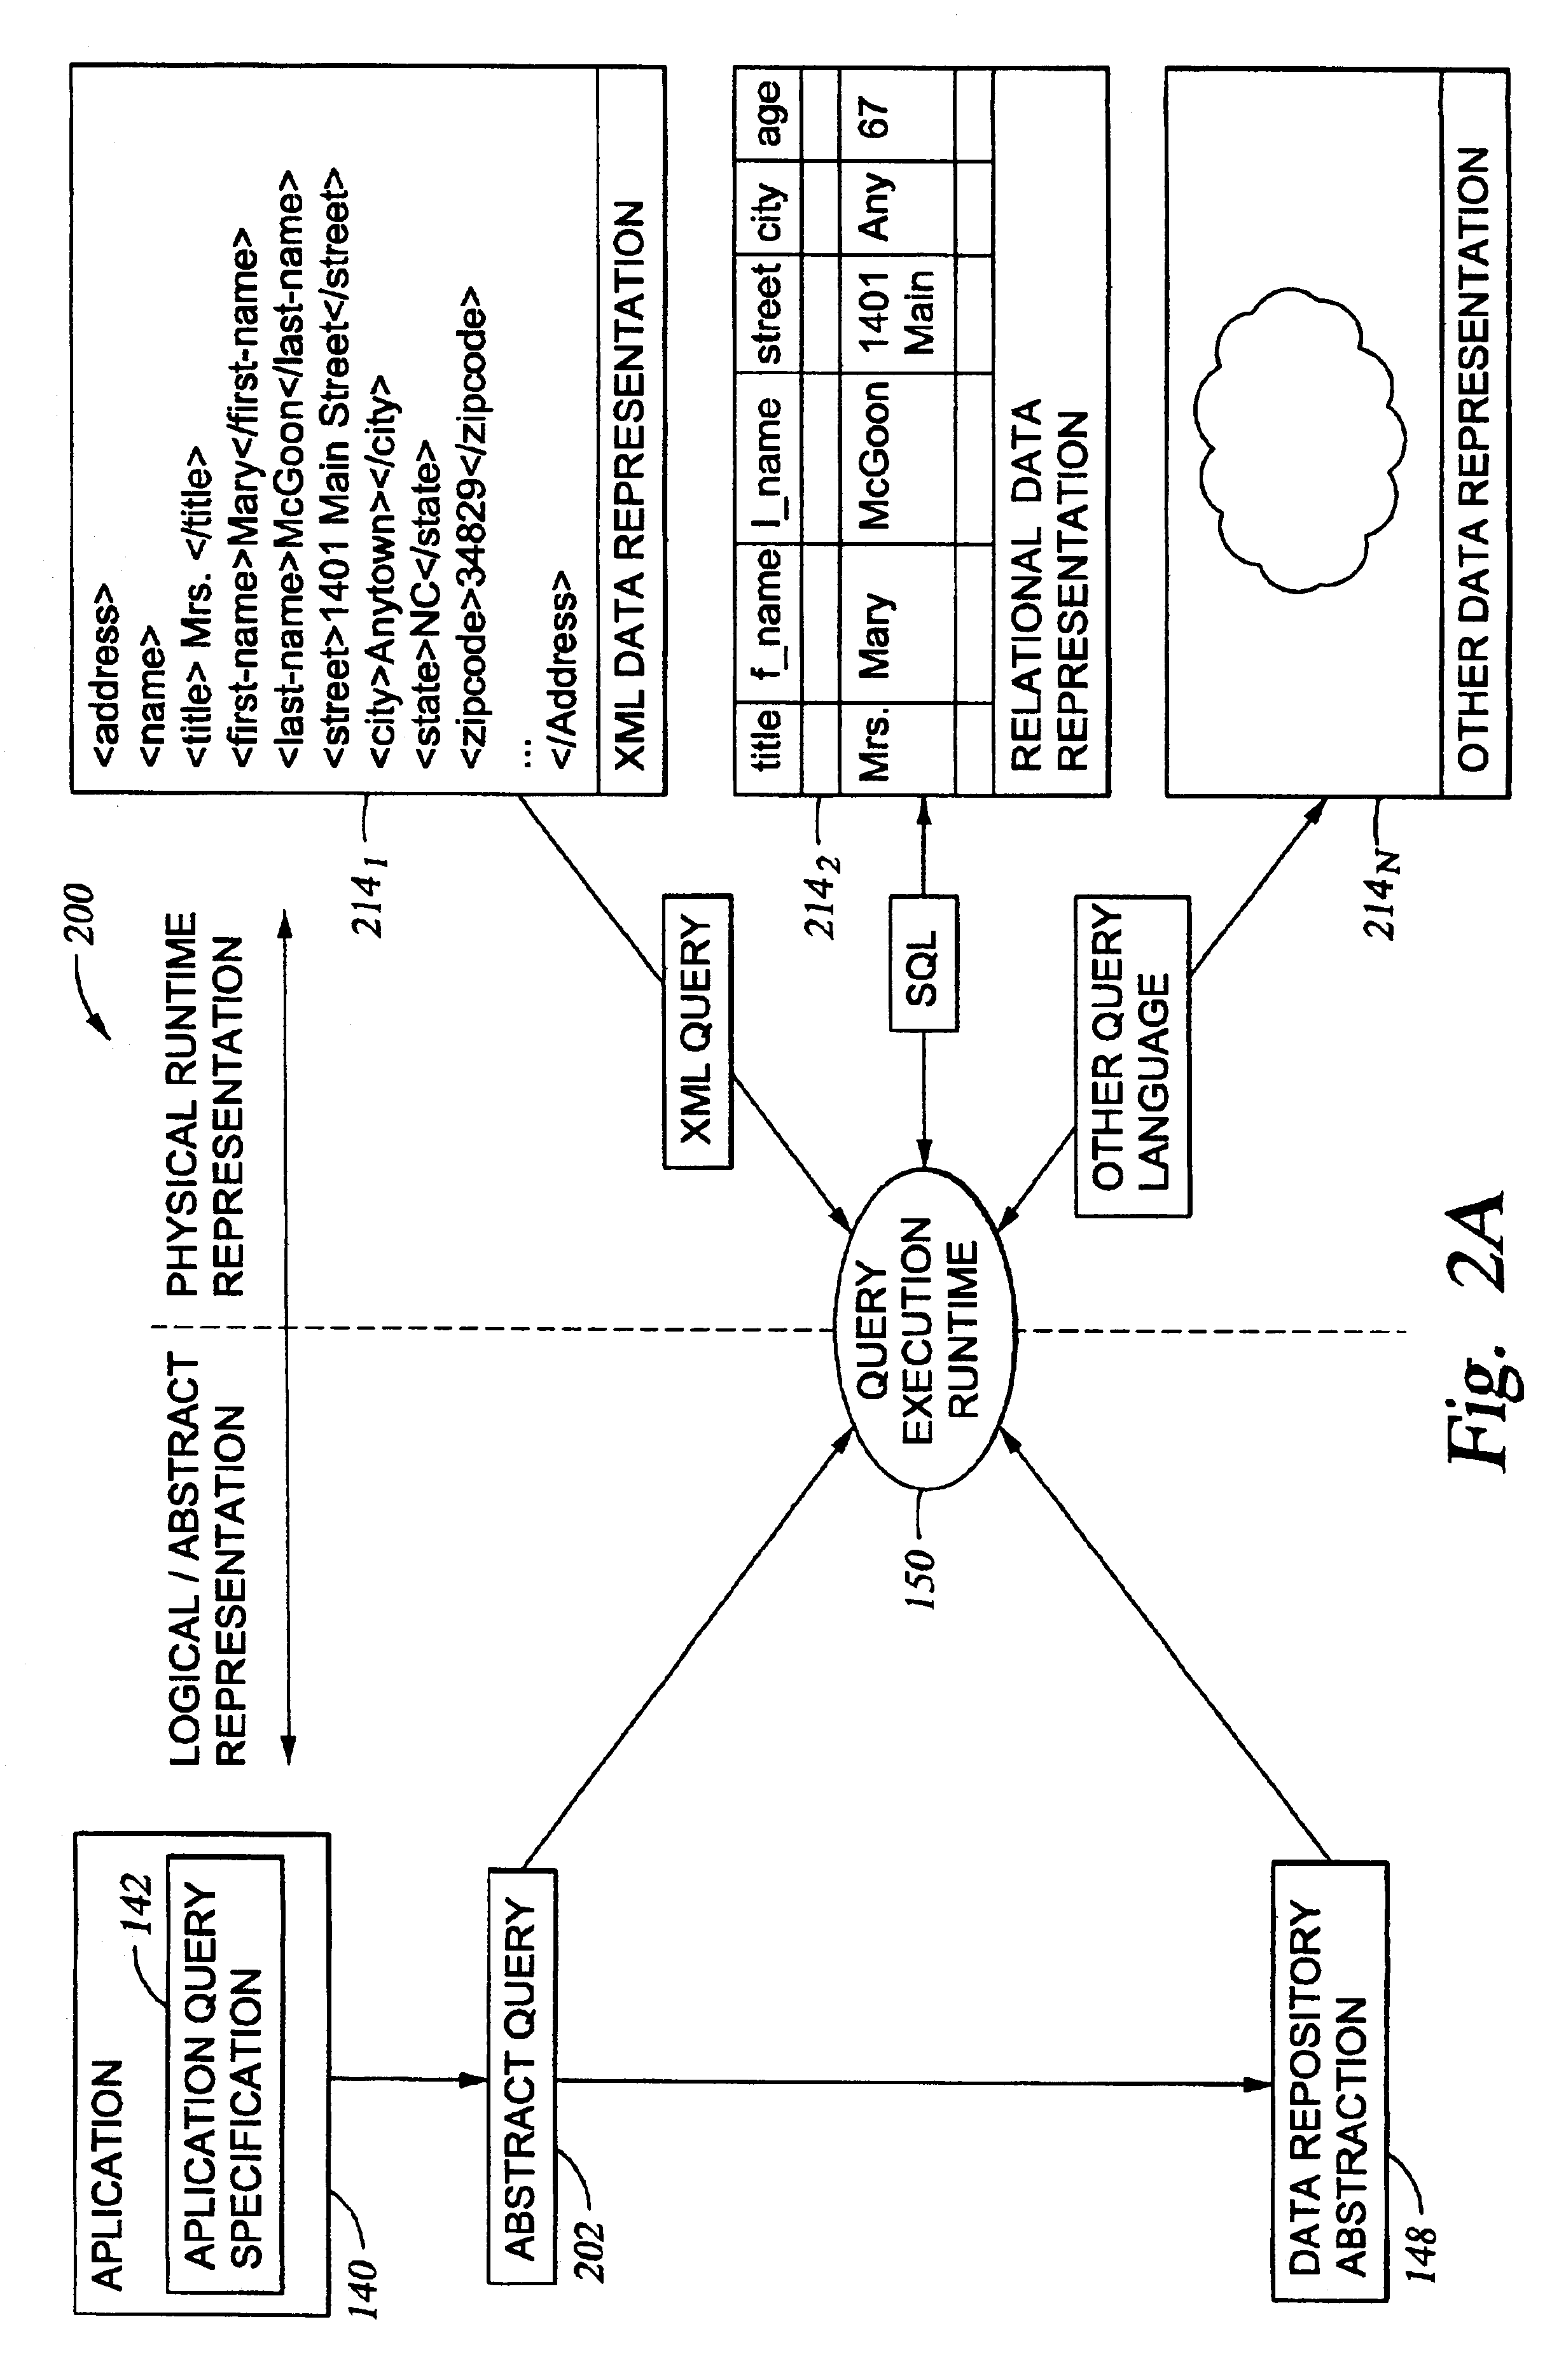 Dynamic end user specific customization of an application's physical data layer through a data repository abstraction layer